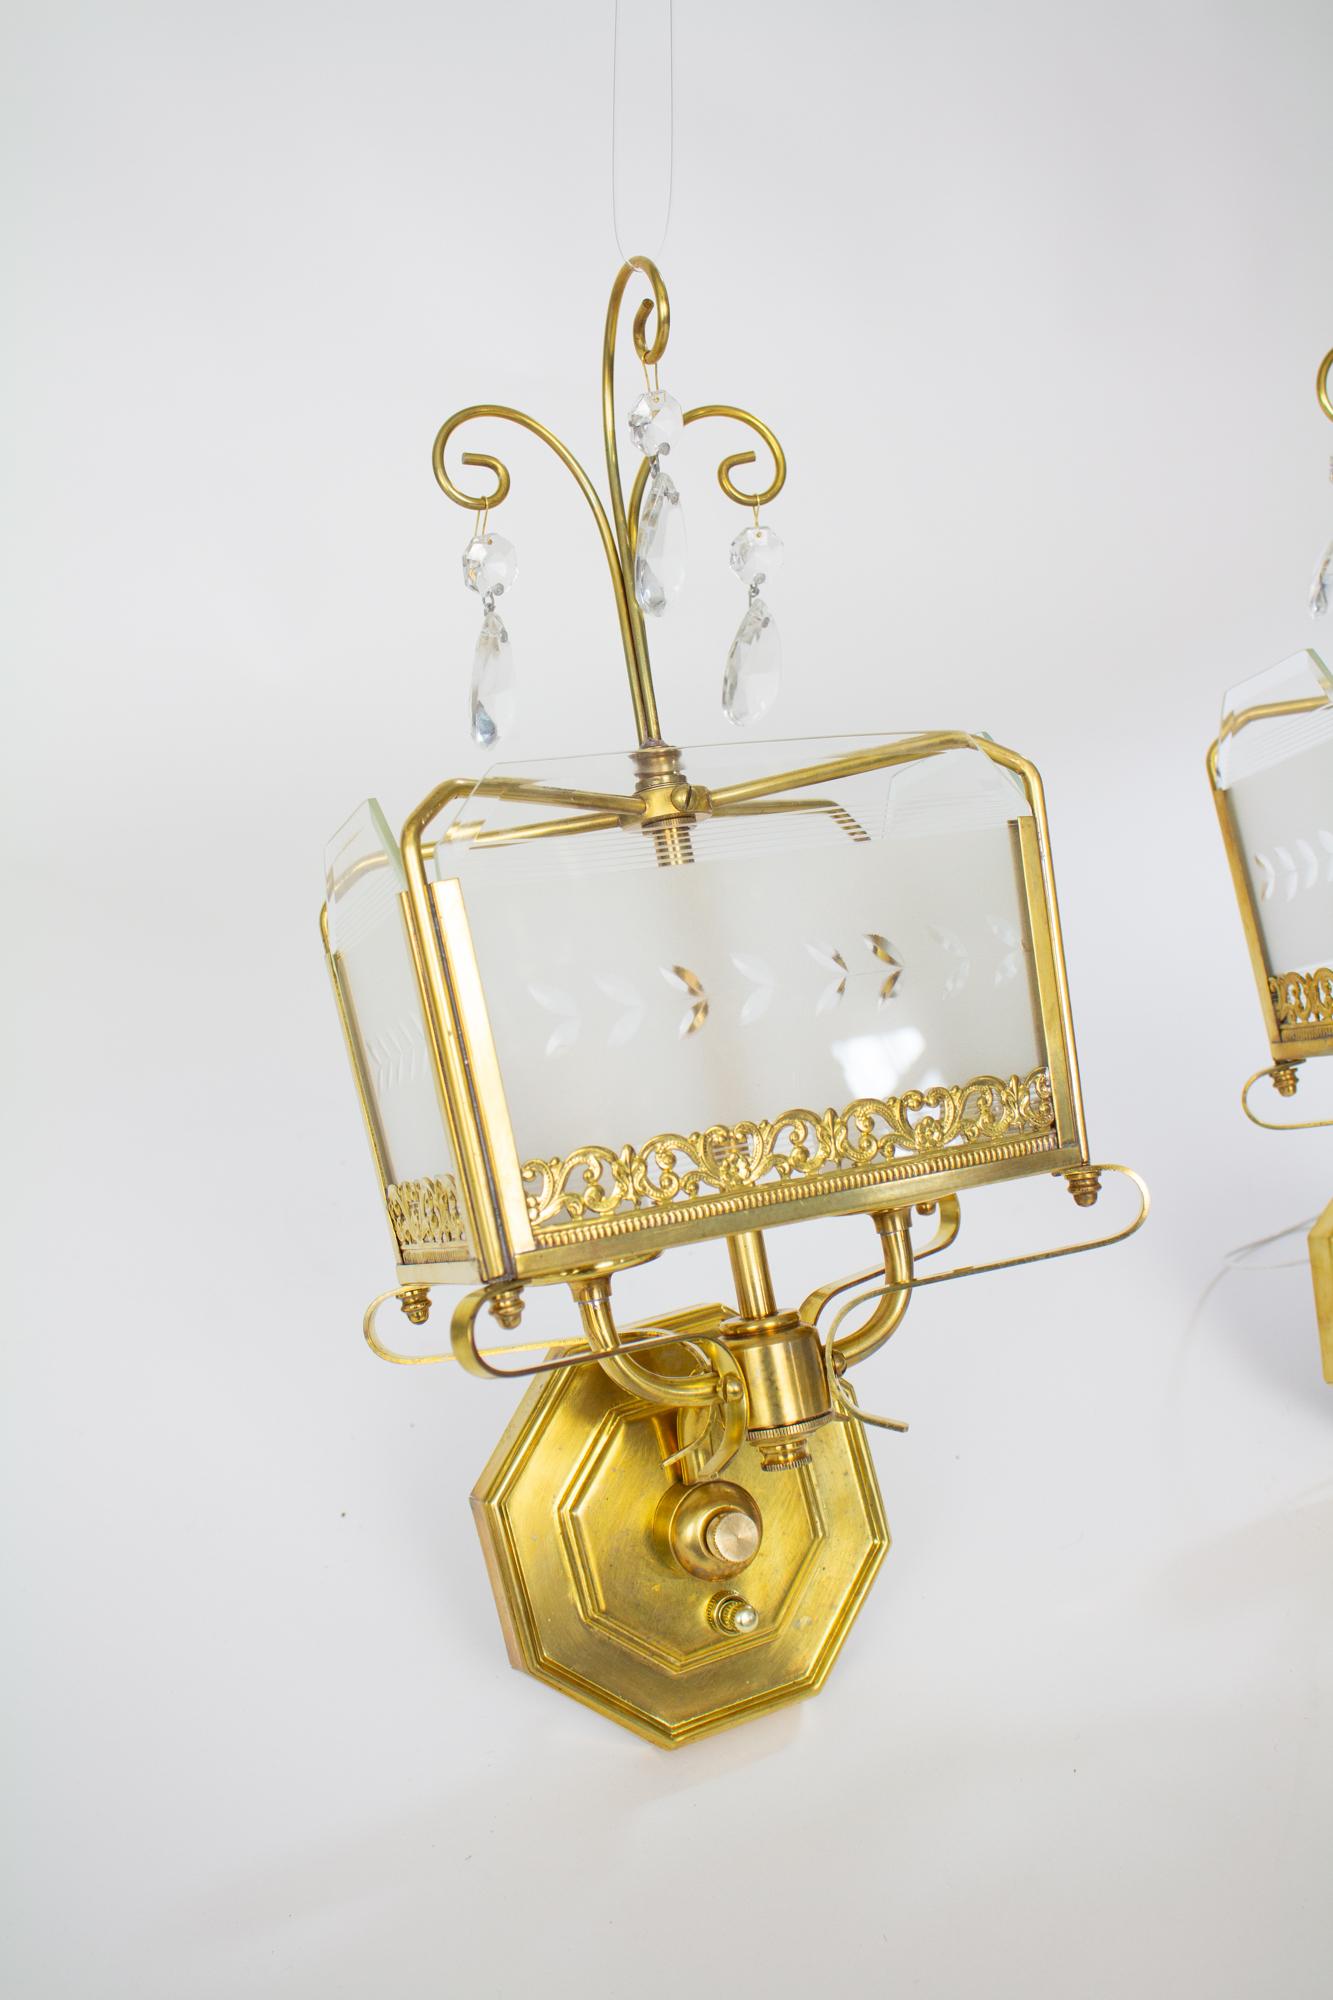 Mid 20th Century hollywood regency etched glass panel and brass sconces. Etched and Frosted glass panels with beveled edges on the front and sides held in place with a brass frame. Delicate brass curls from top and holds crystals. Two lights.